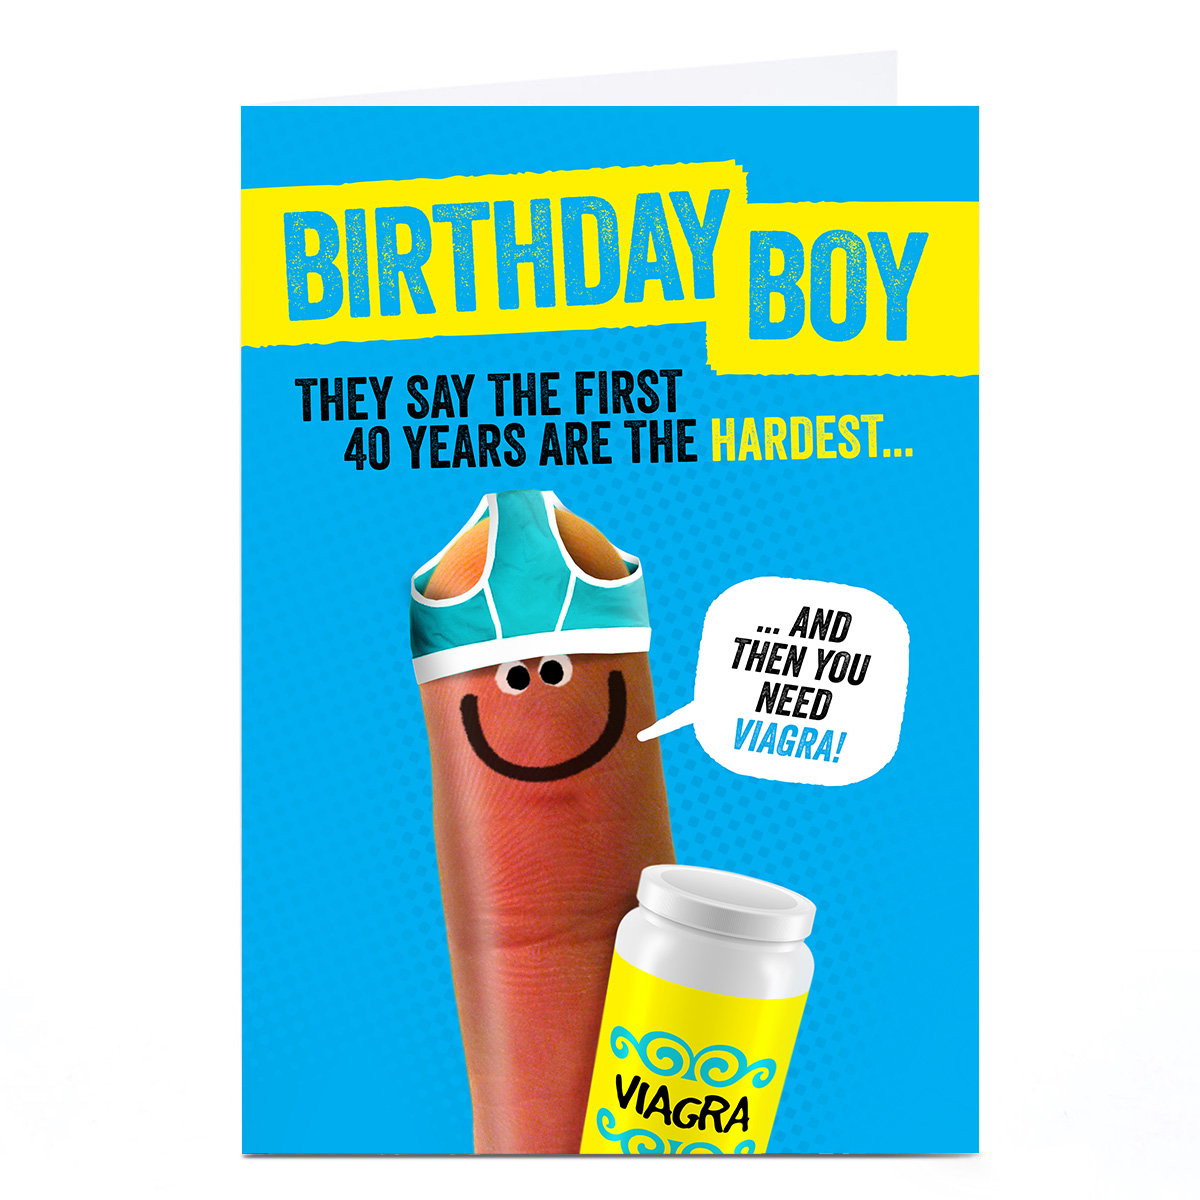 Personalised Finger Quips Birthday Card - The First 40 Years...